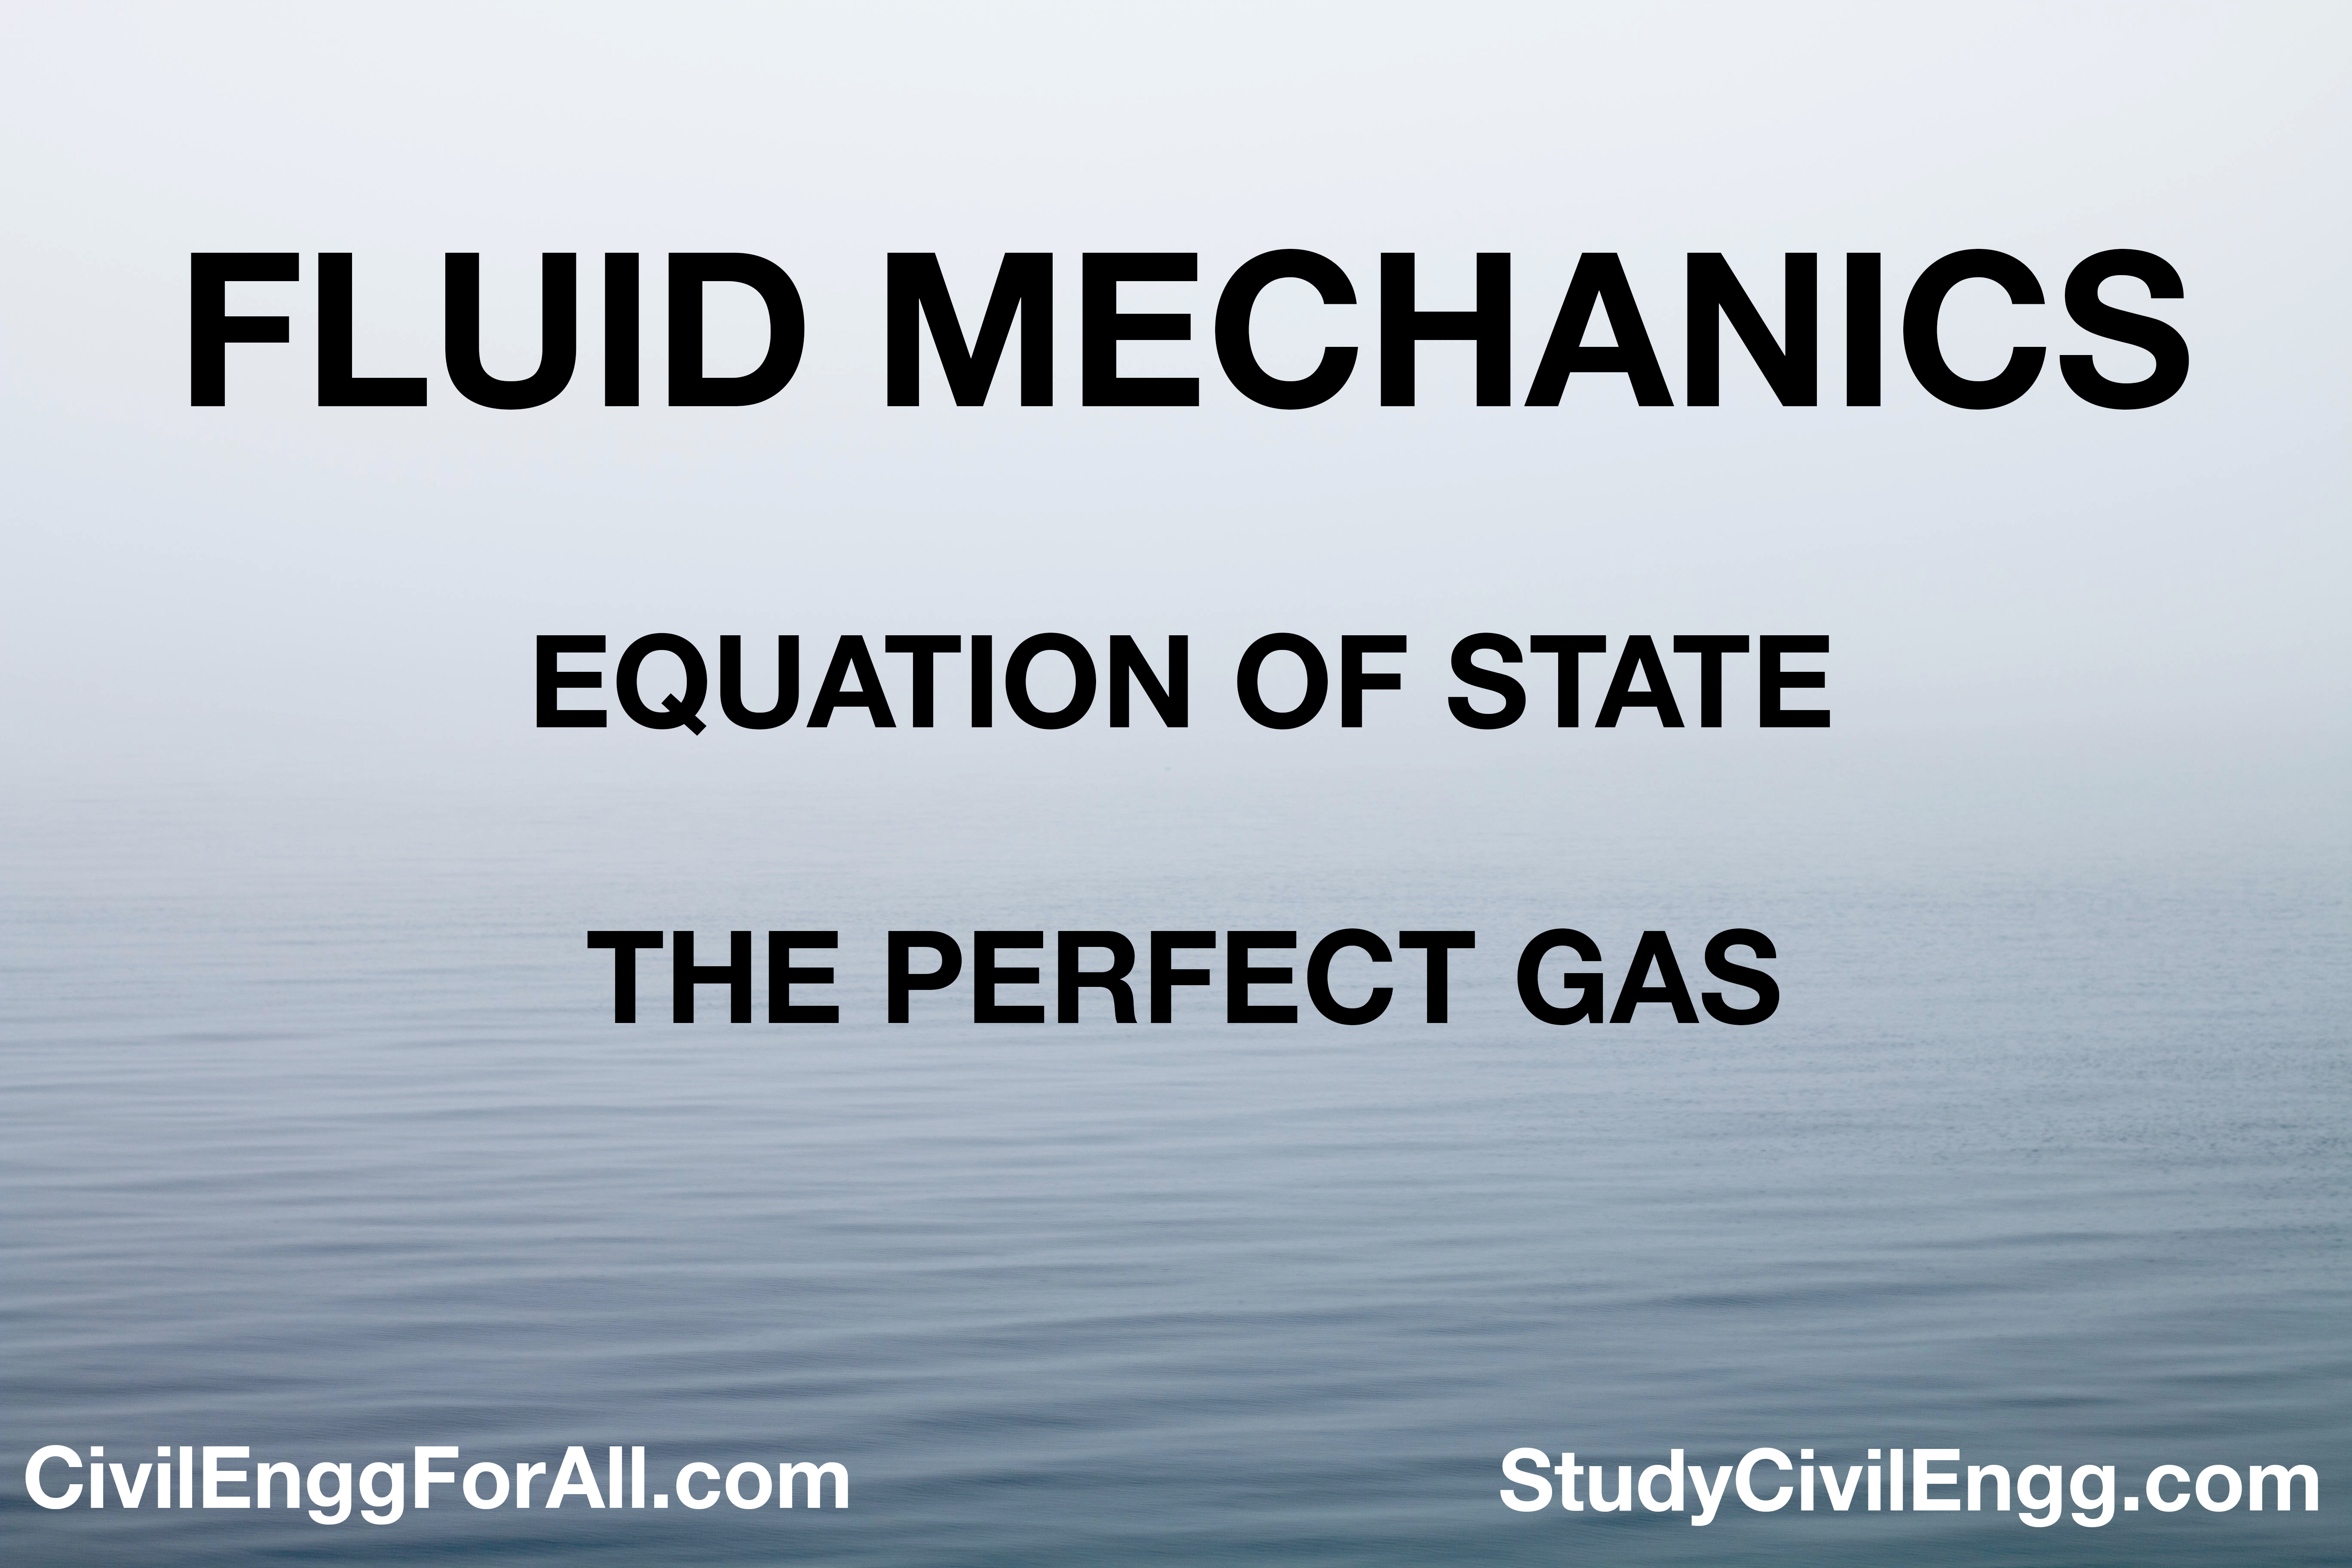 Equation of State - The perfect gas - StudyCivilEngg